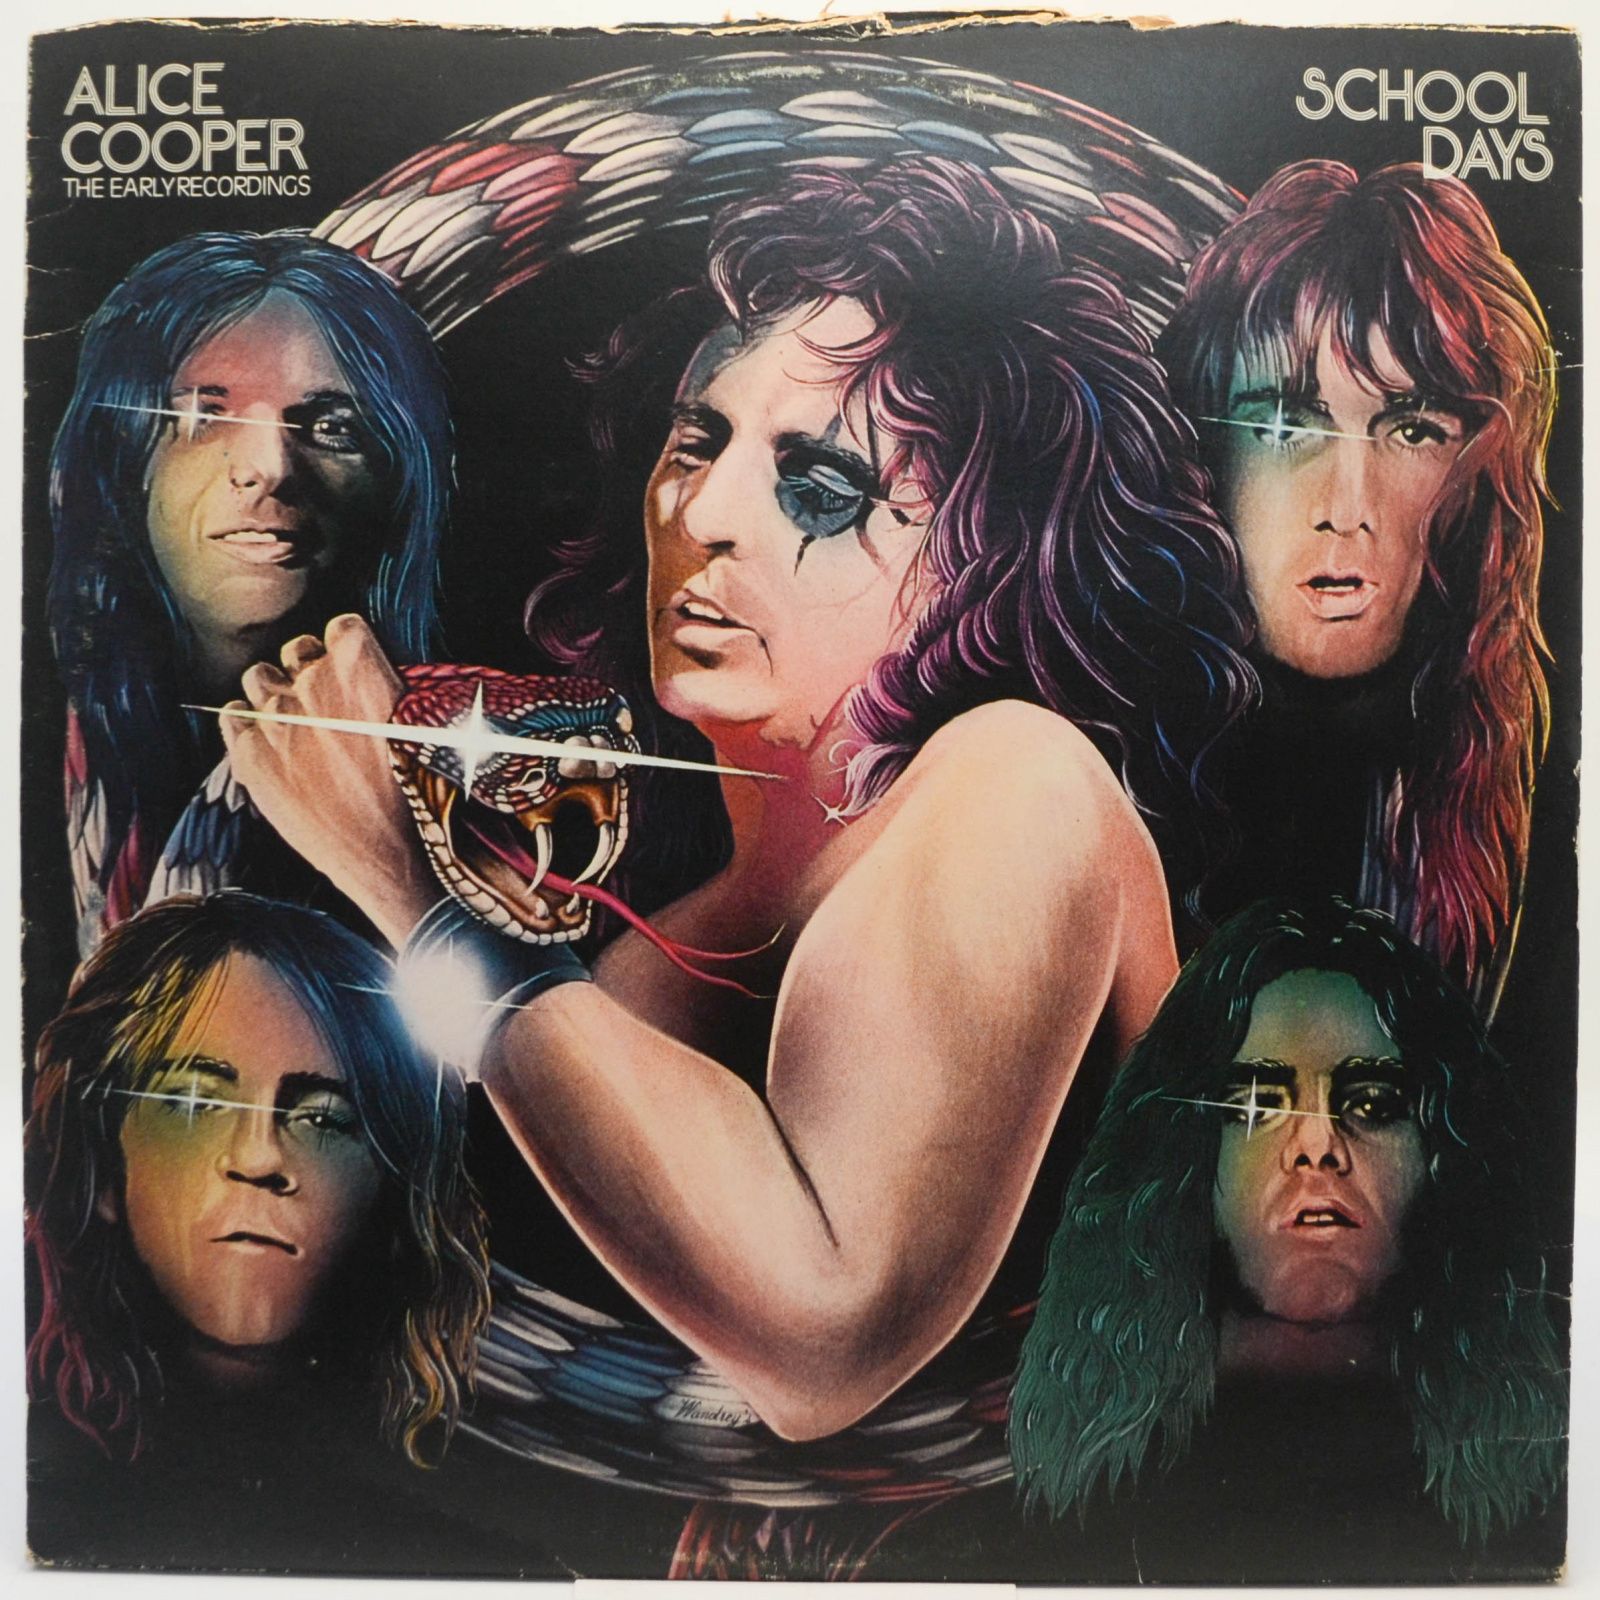 Alice Cooper — School Days - The Early Recordings (2LP), 1973